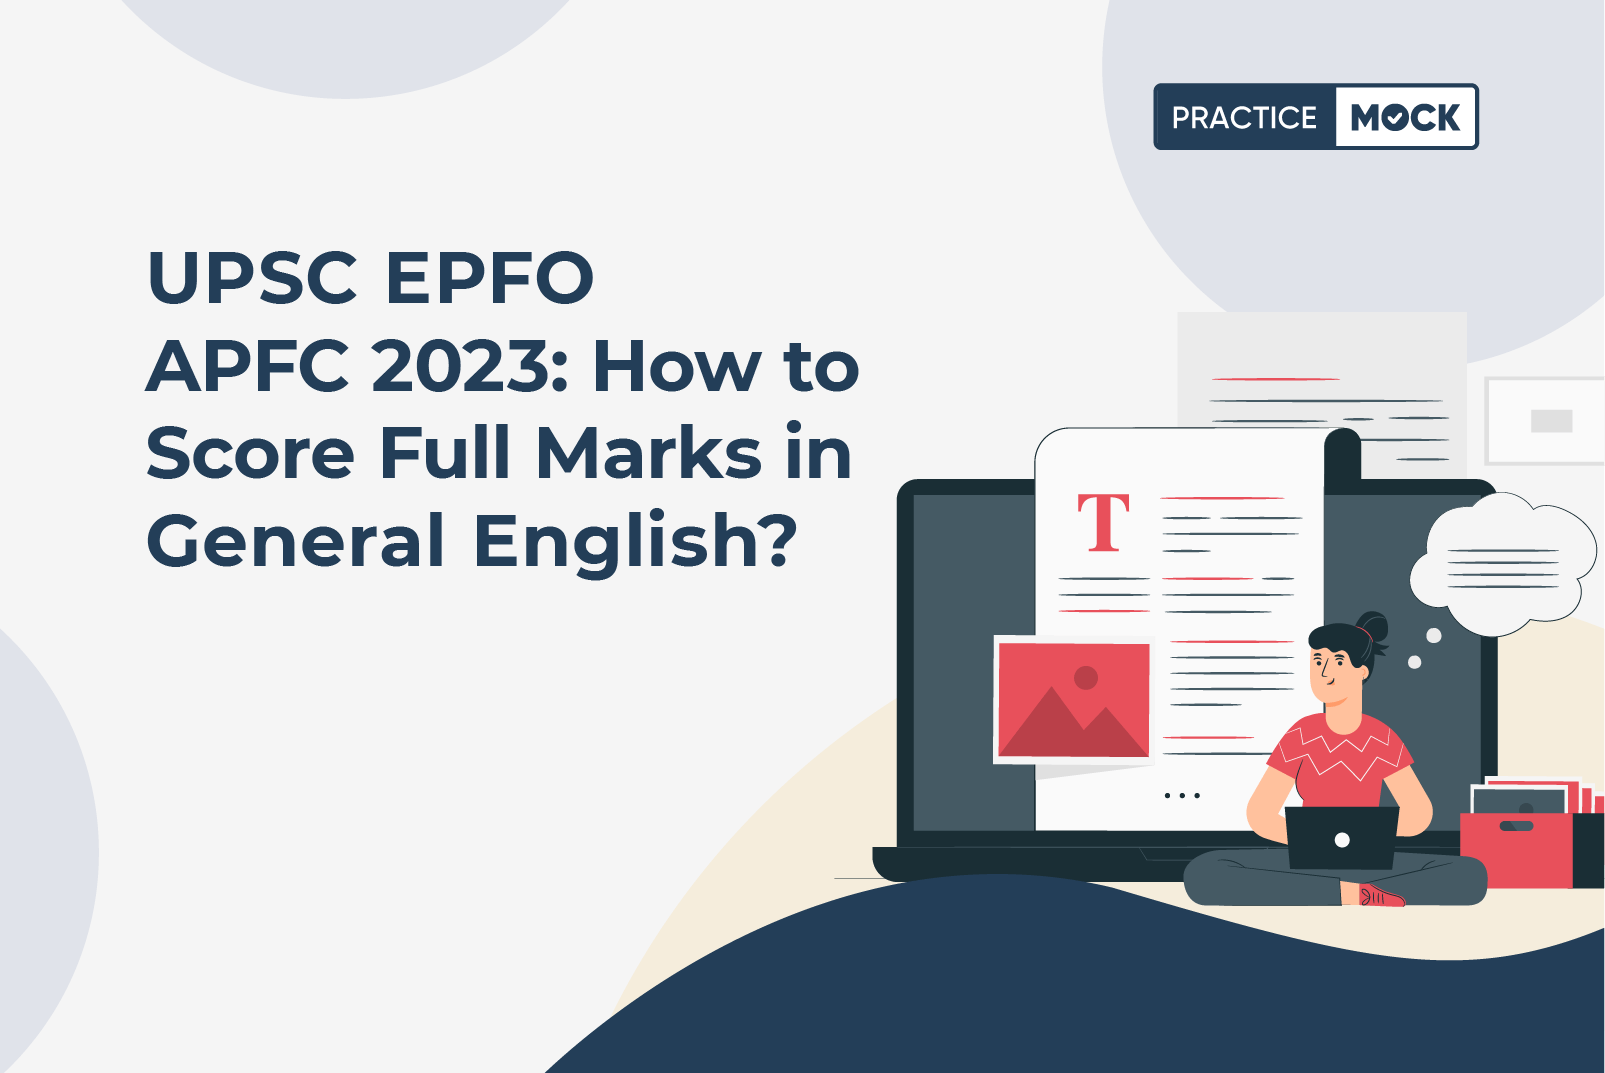 UPSC EPFO APFC 2023-How to Score Full Marks in General English?